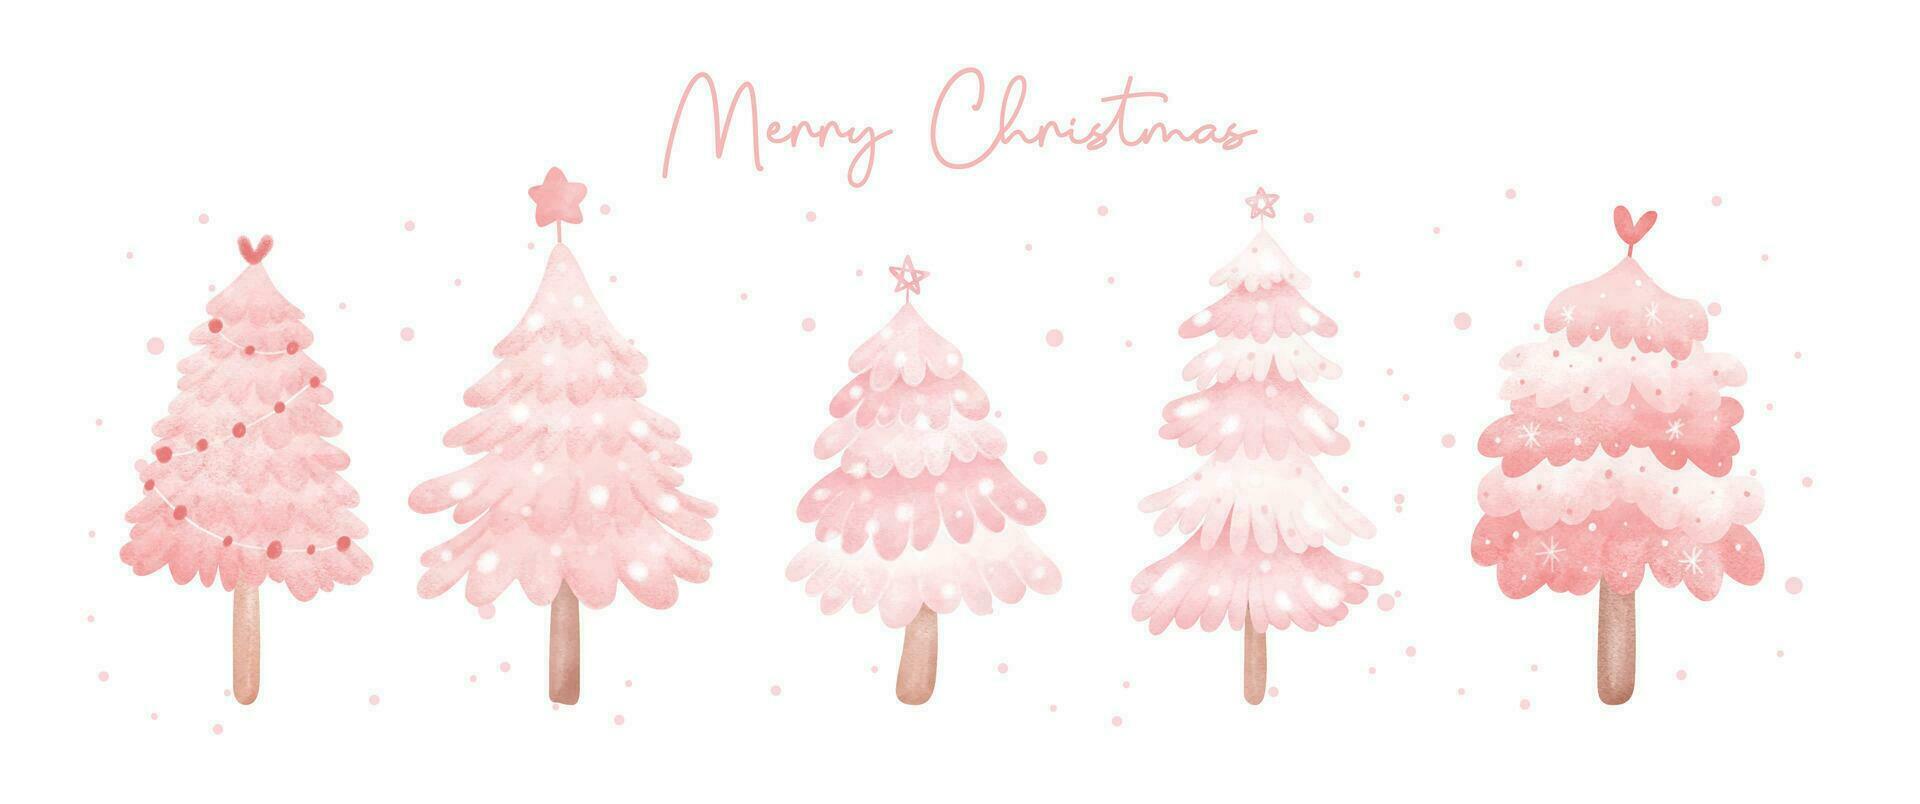 Cute Pink Christmas Pine Trees  Watercolor Hand Painting banner greeting card. vector